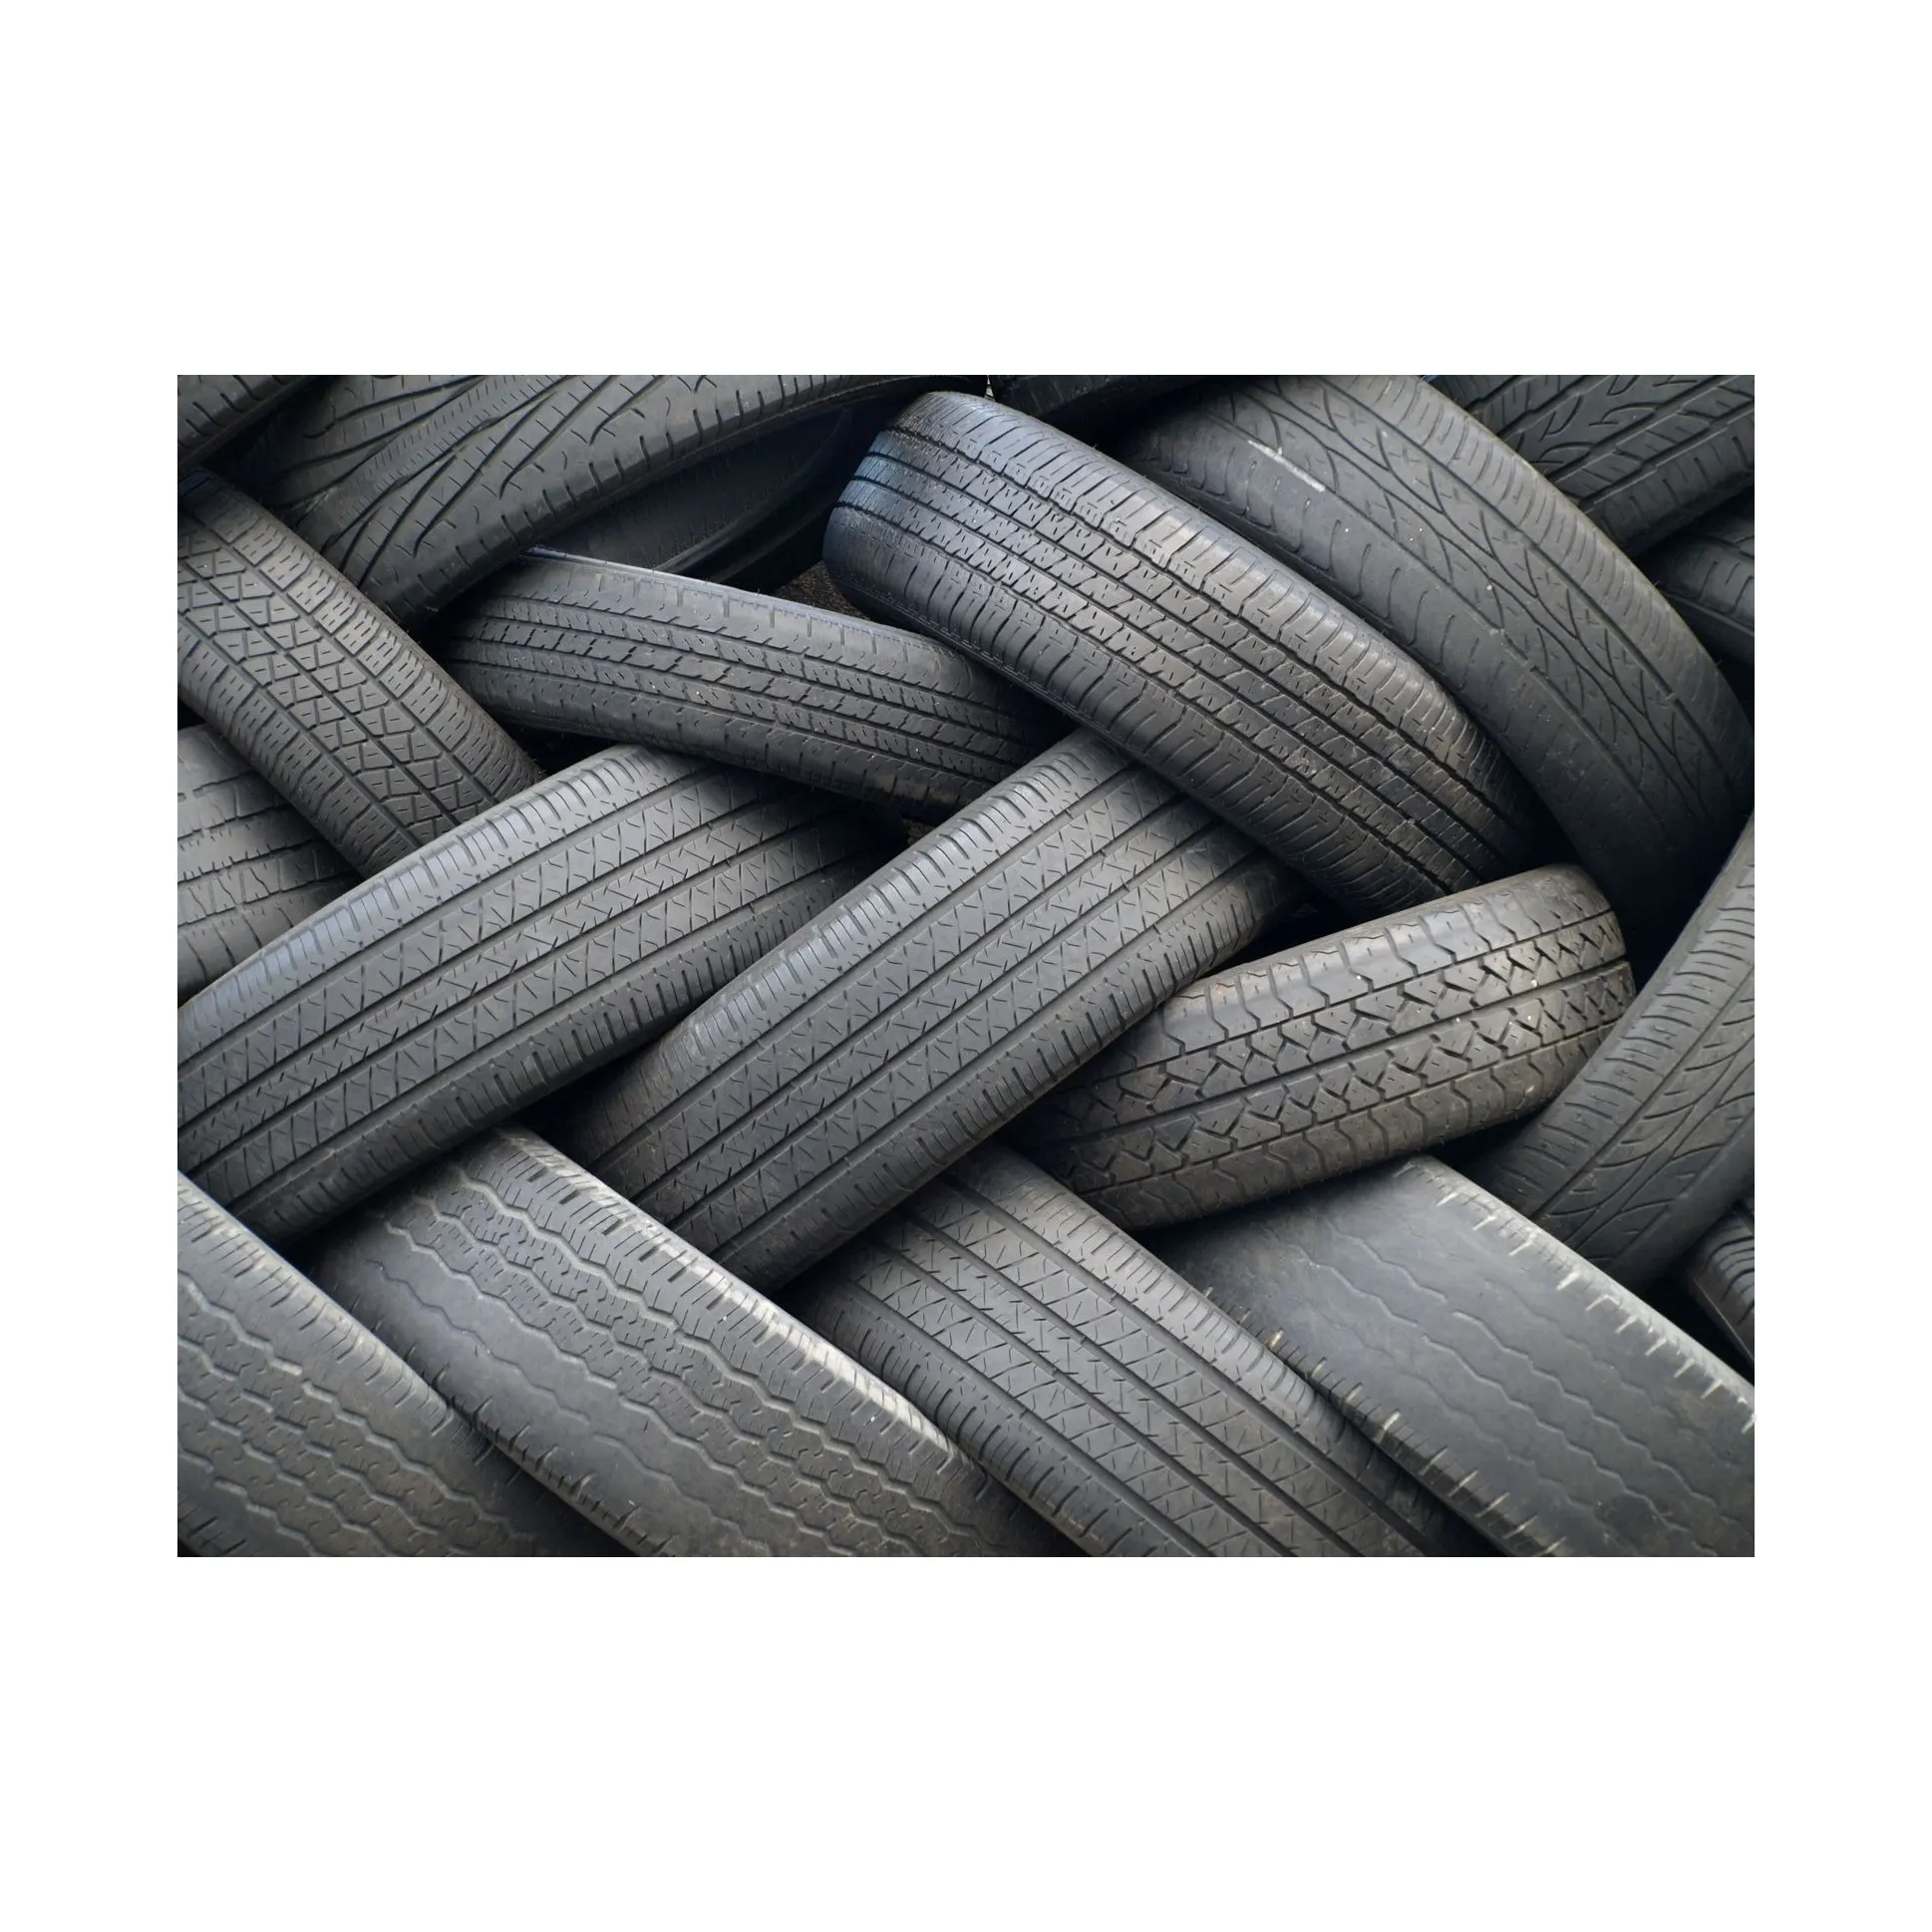 Wholesale Used Tire Rubber Tyres For Sale/Vehicles Tires Whole Sale